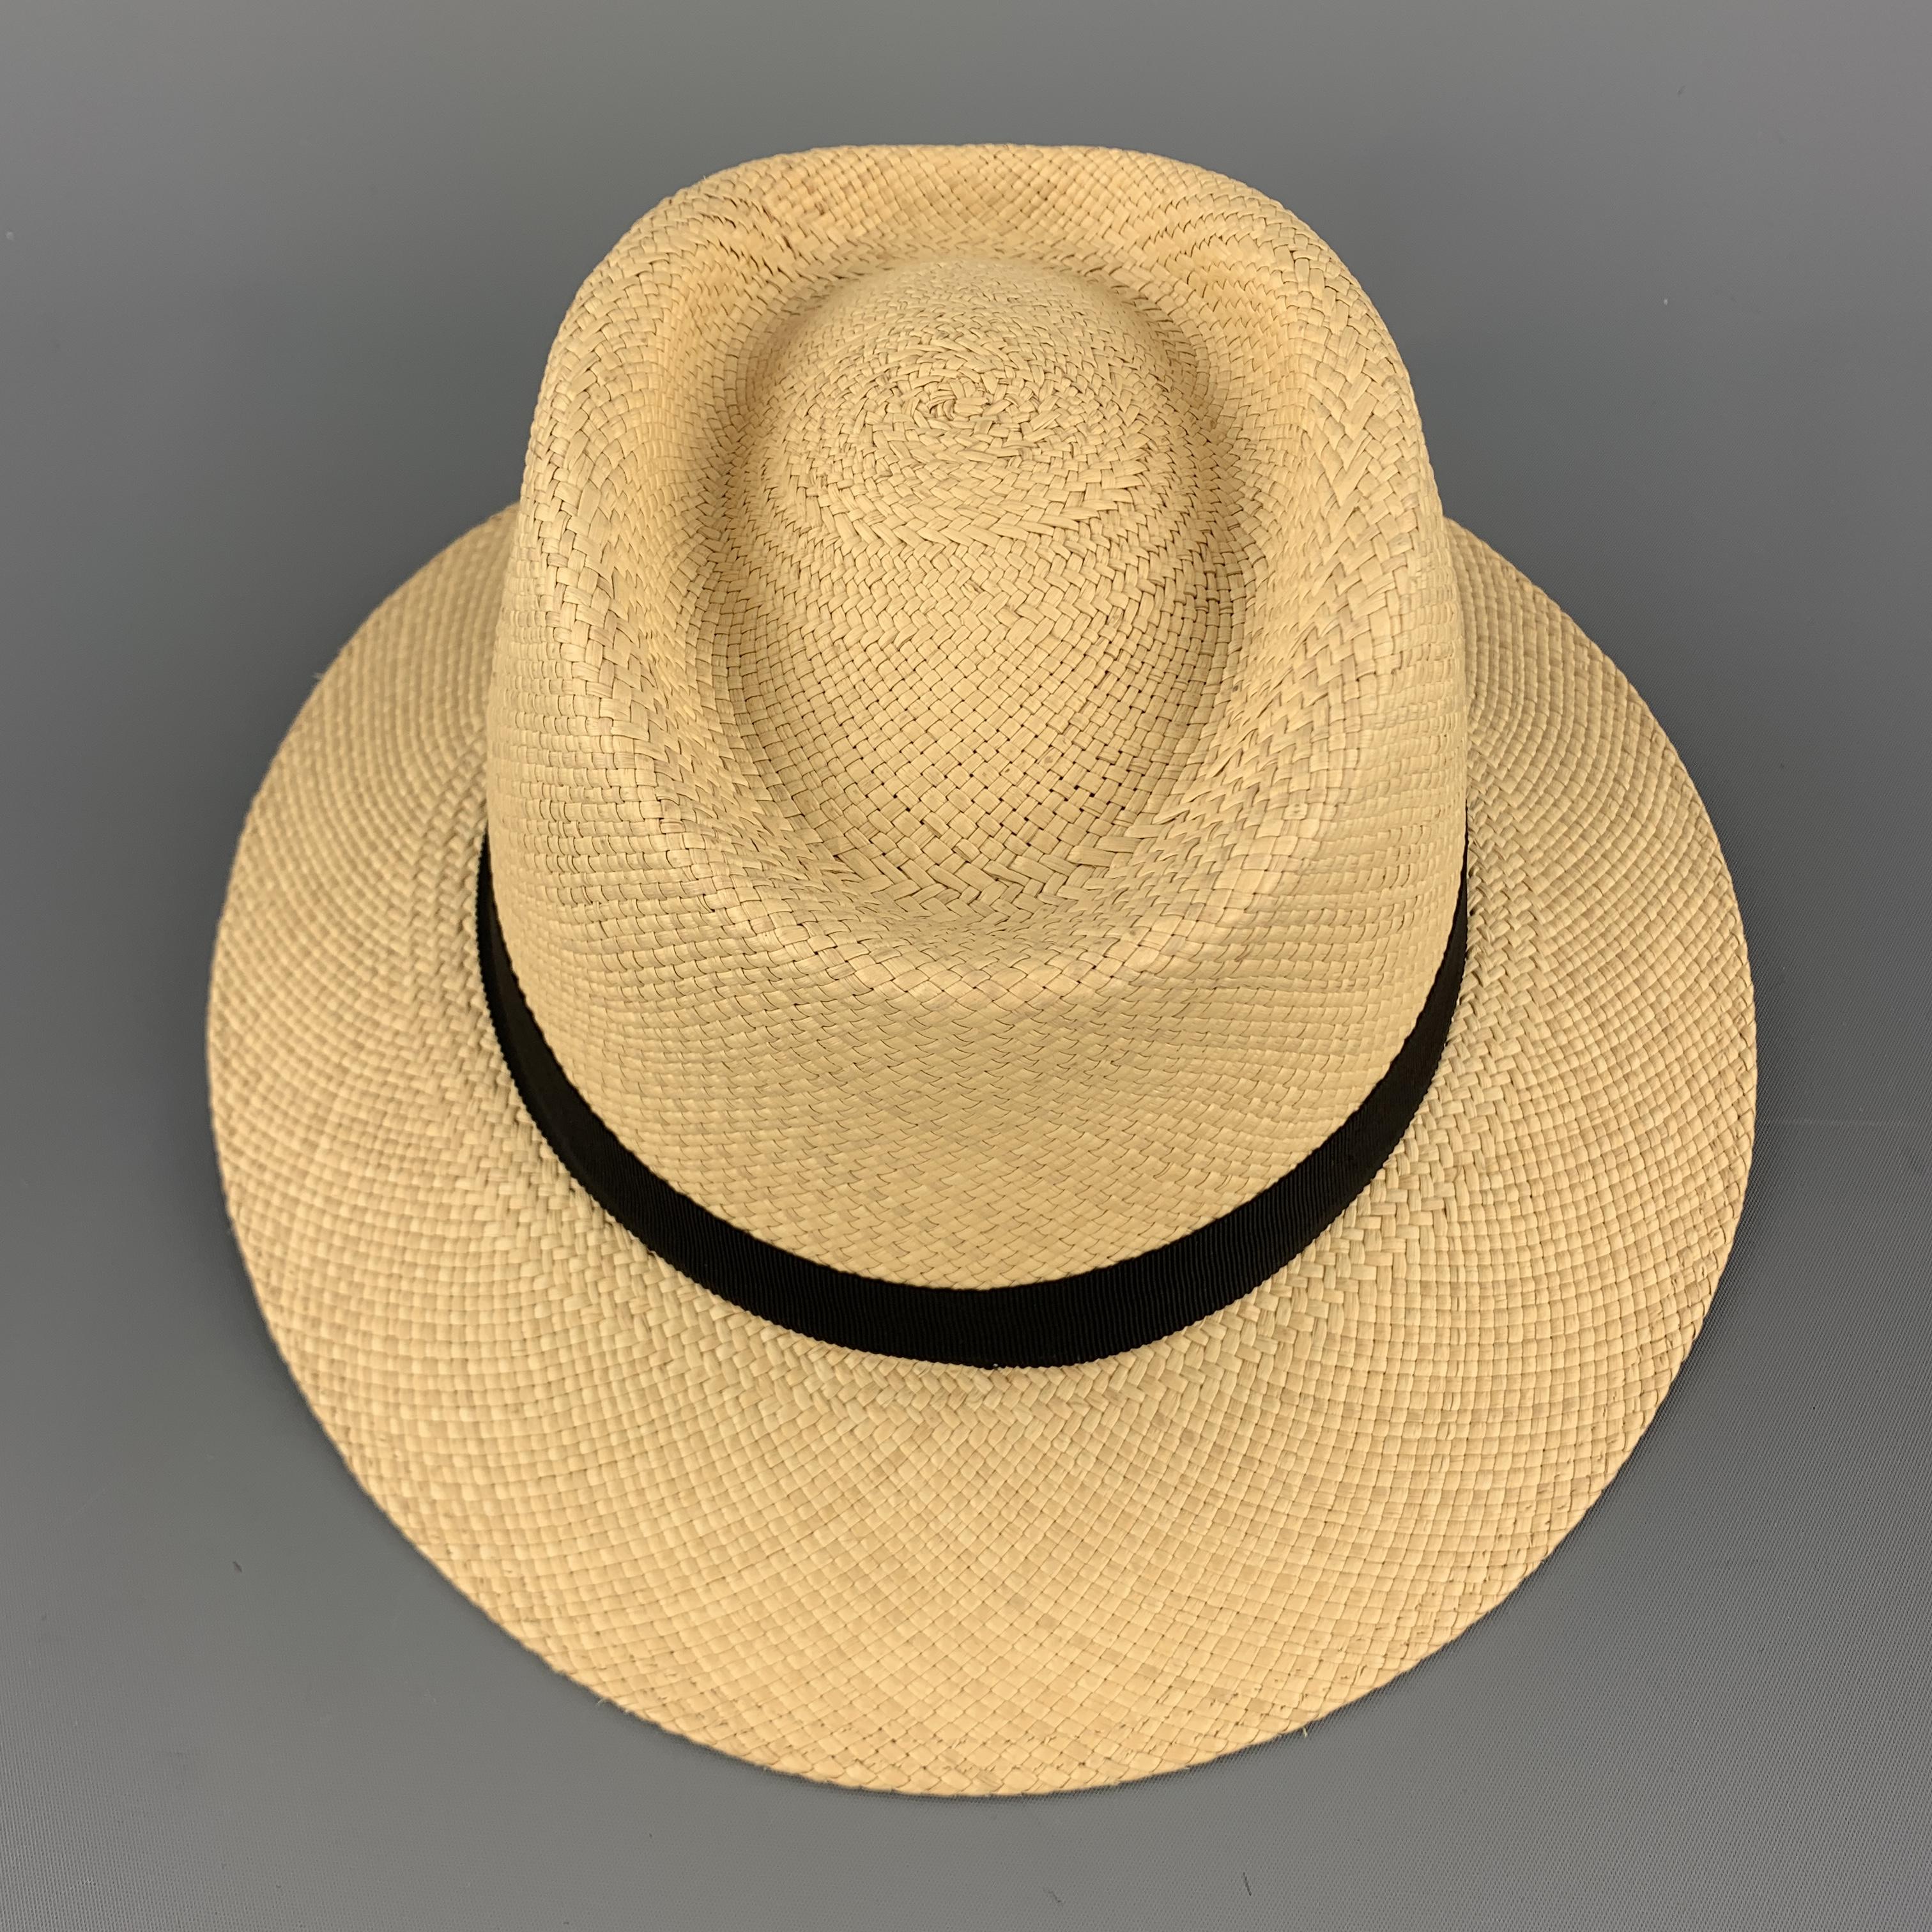 PAUL STUART Panama hat comes in natural woven straw with a black grosgrain trim. Made in Ecuador.

Excellent Pre-Owned Condition.
Marked: (no size)

Measurements:

Opening: 23 in.
Brim: 2.25 in.
Height: 4 in.